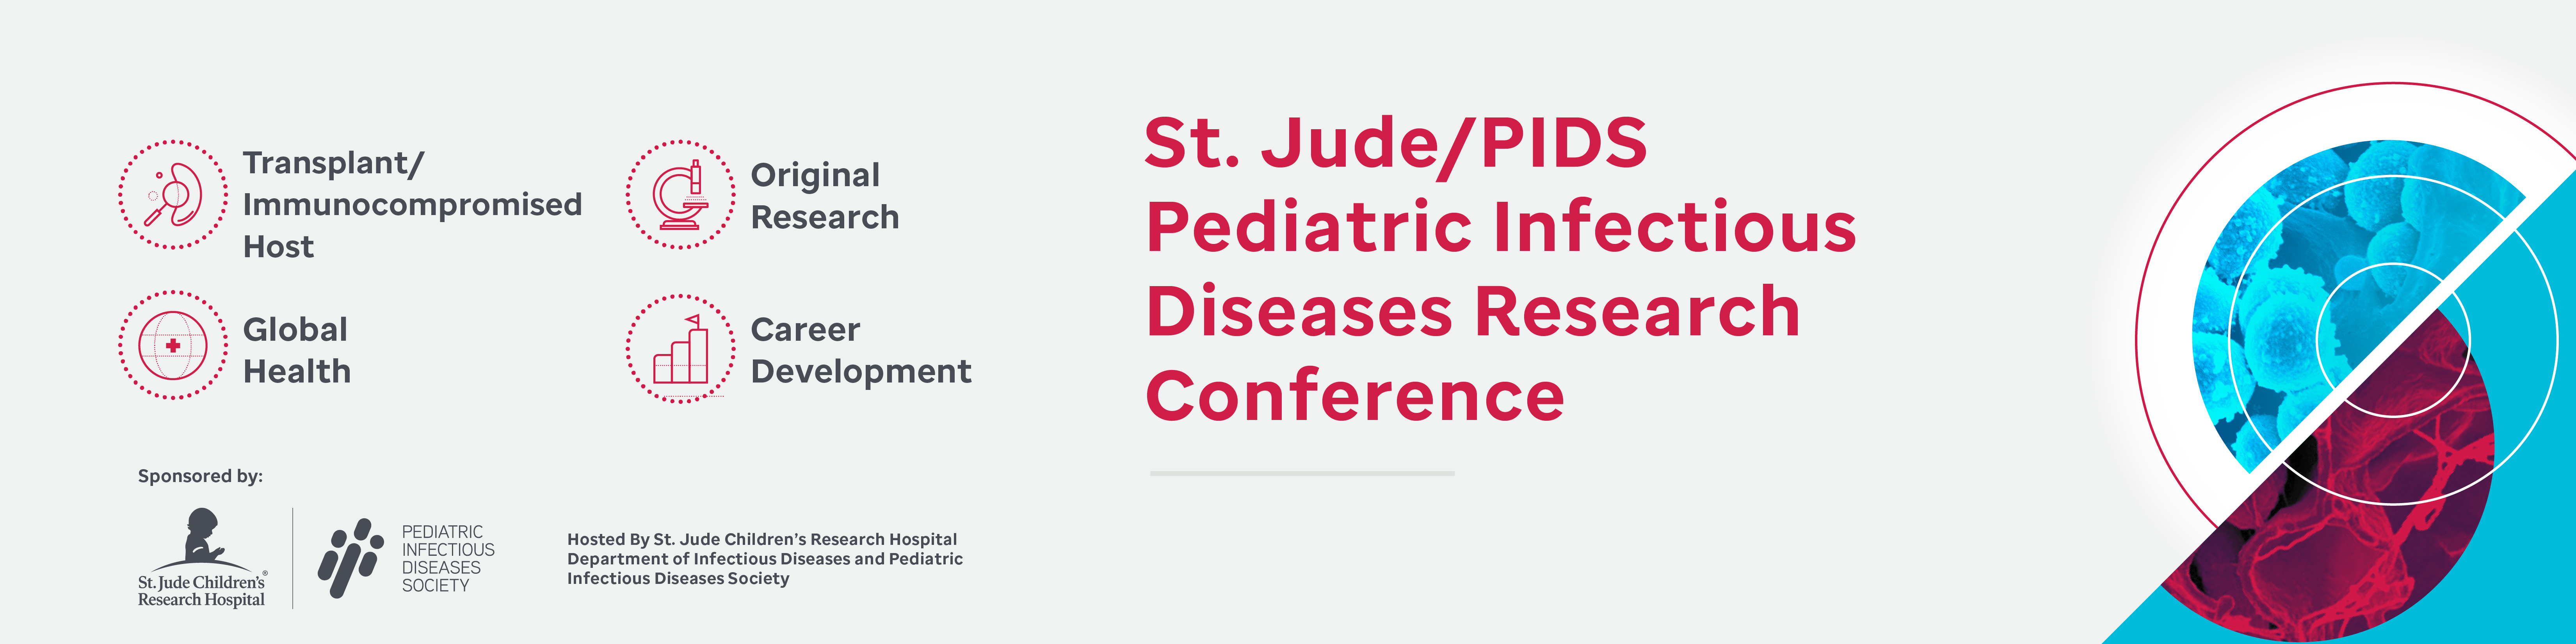 22nd Annual St. Jude PIDS Conference Banner